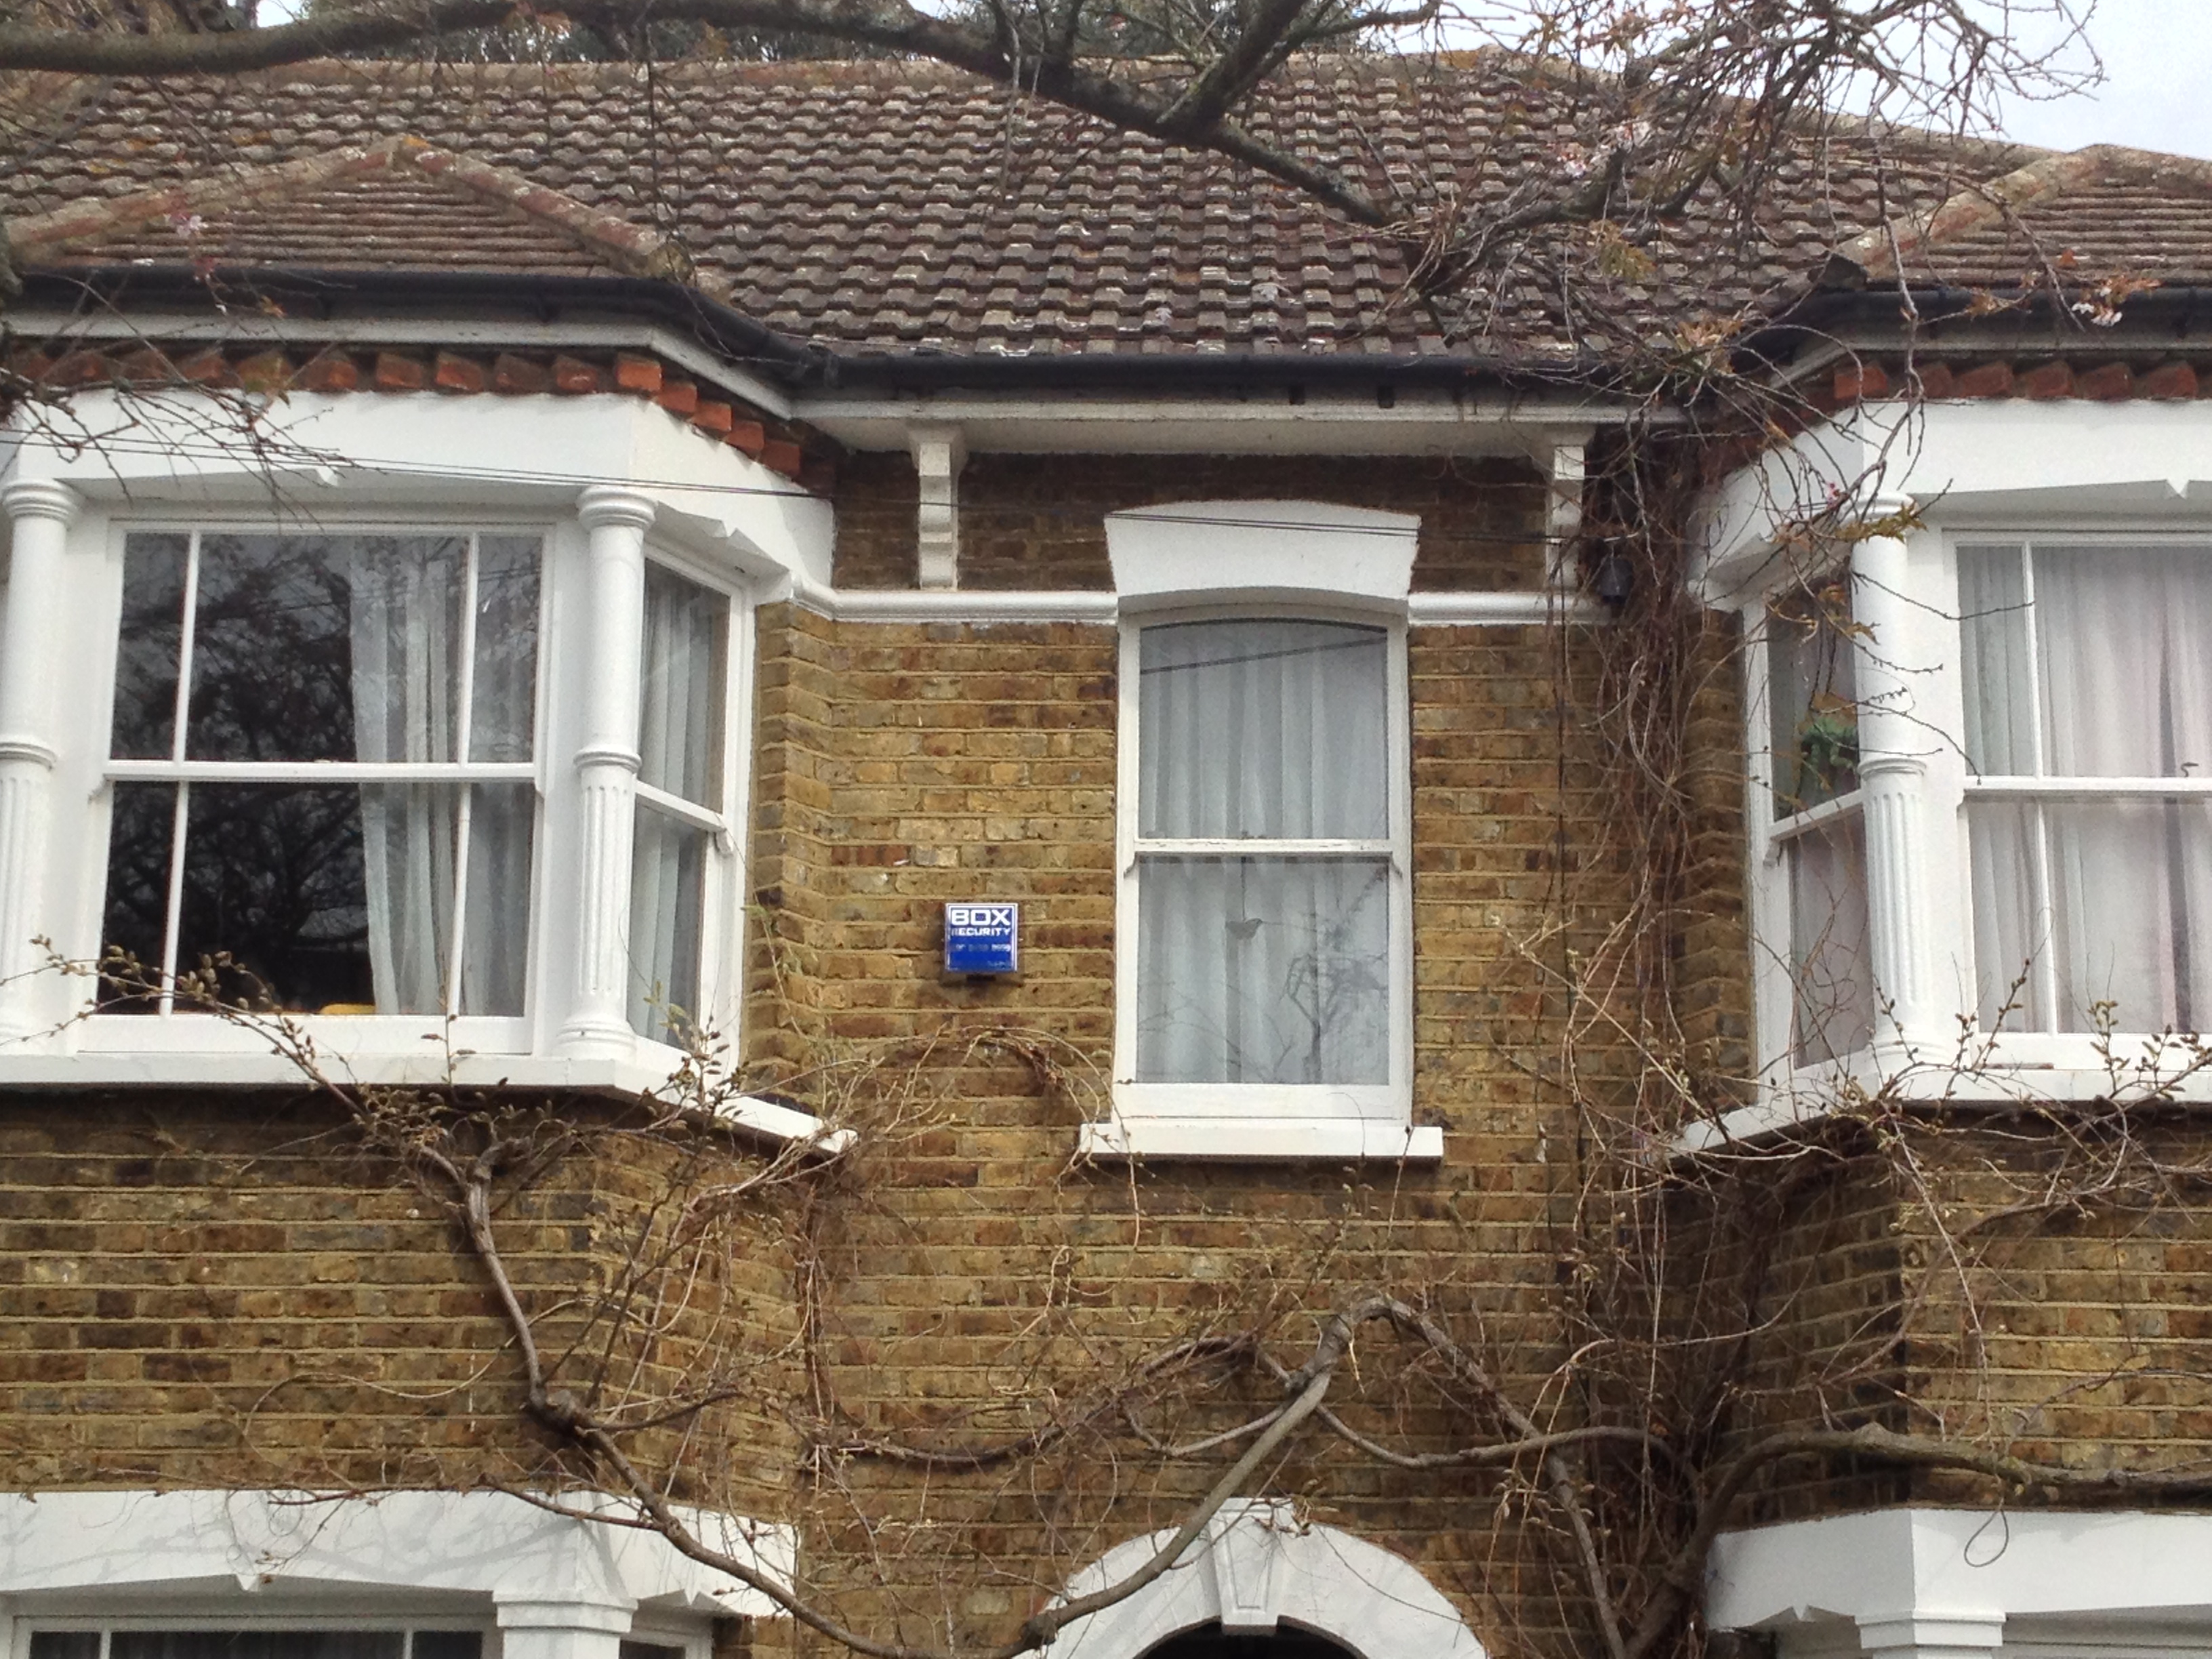 Picture Gallery - BOX Security Alarm System Installation - Brockley.